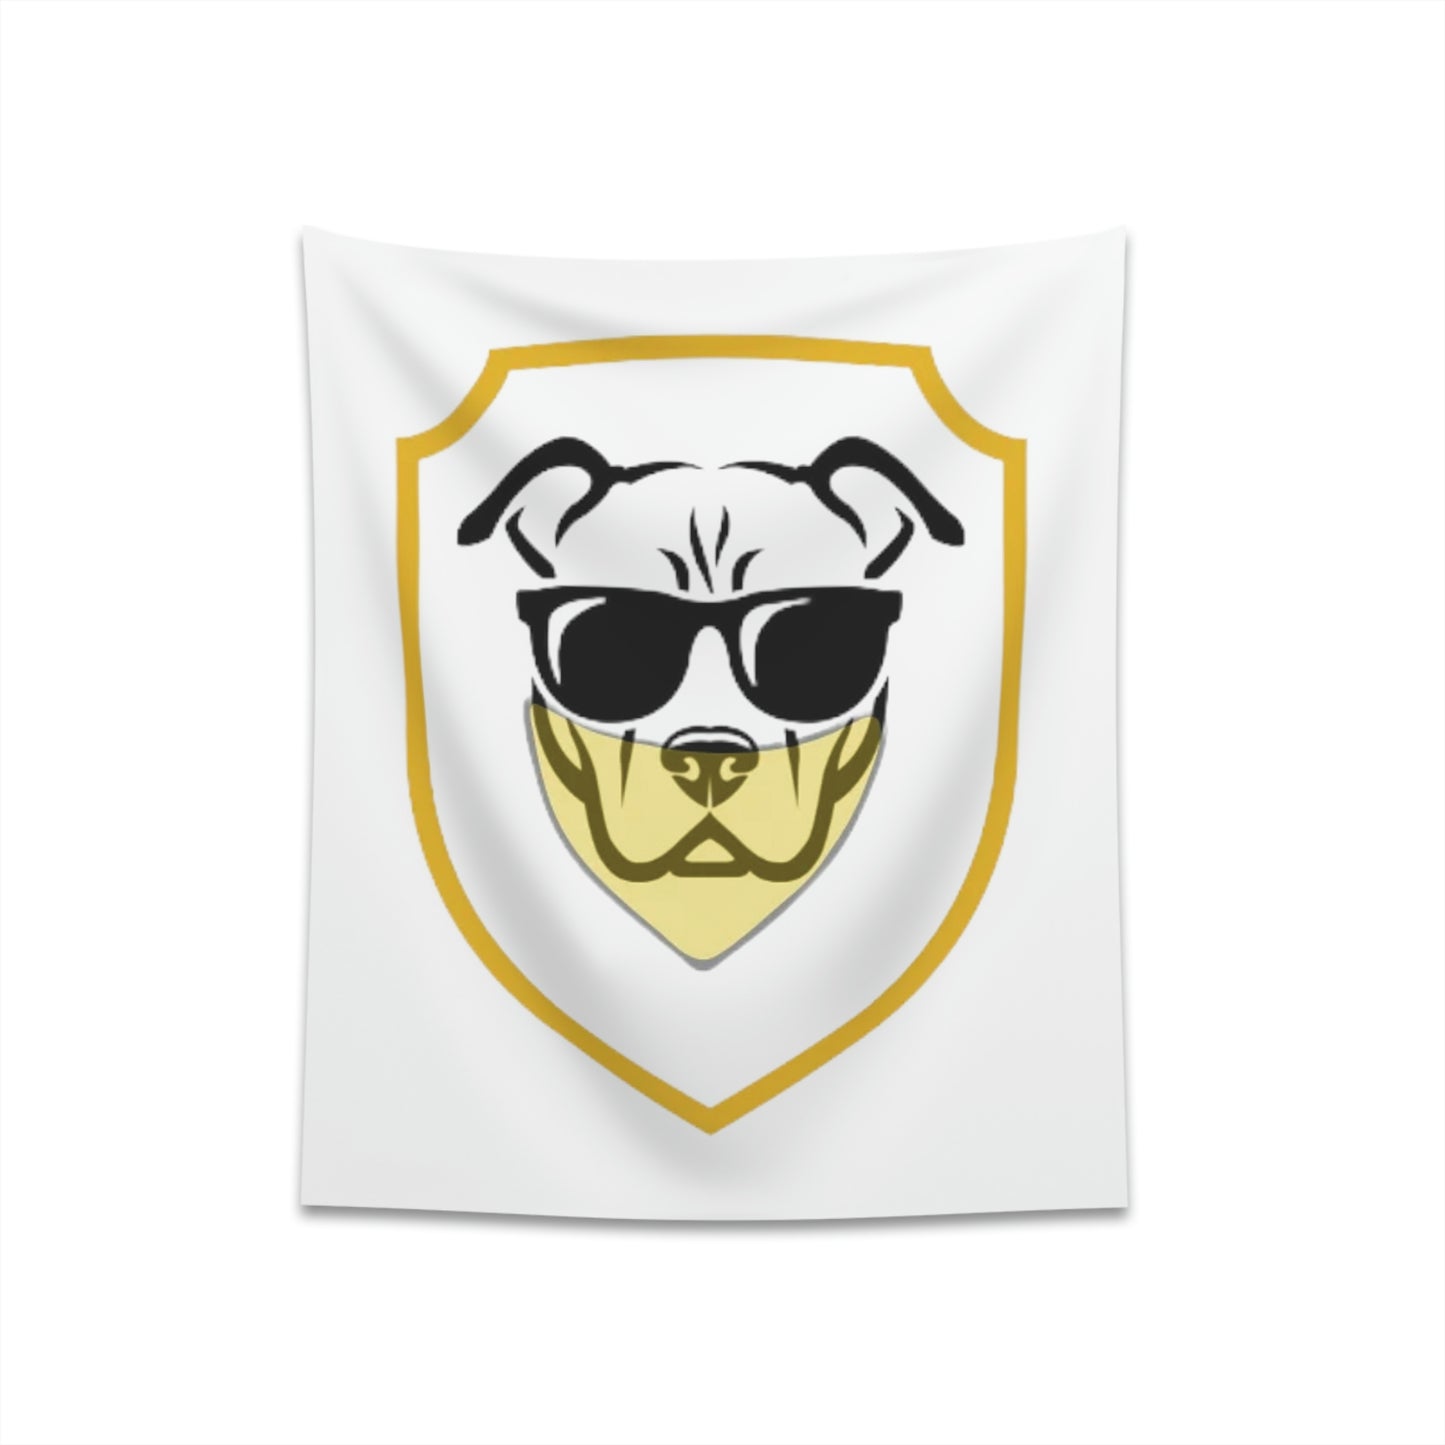 Personalized Pitbull Printed Wall Tapestry